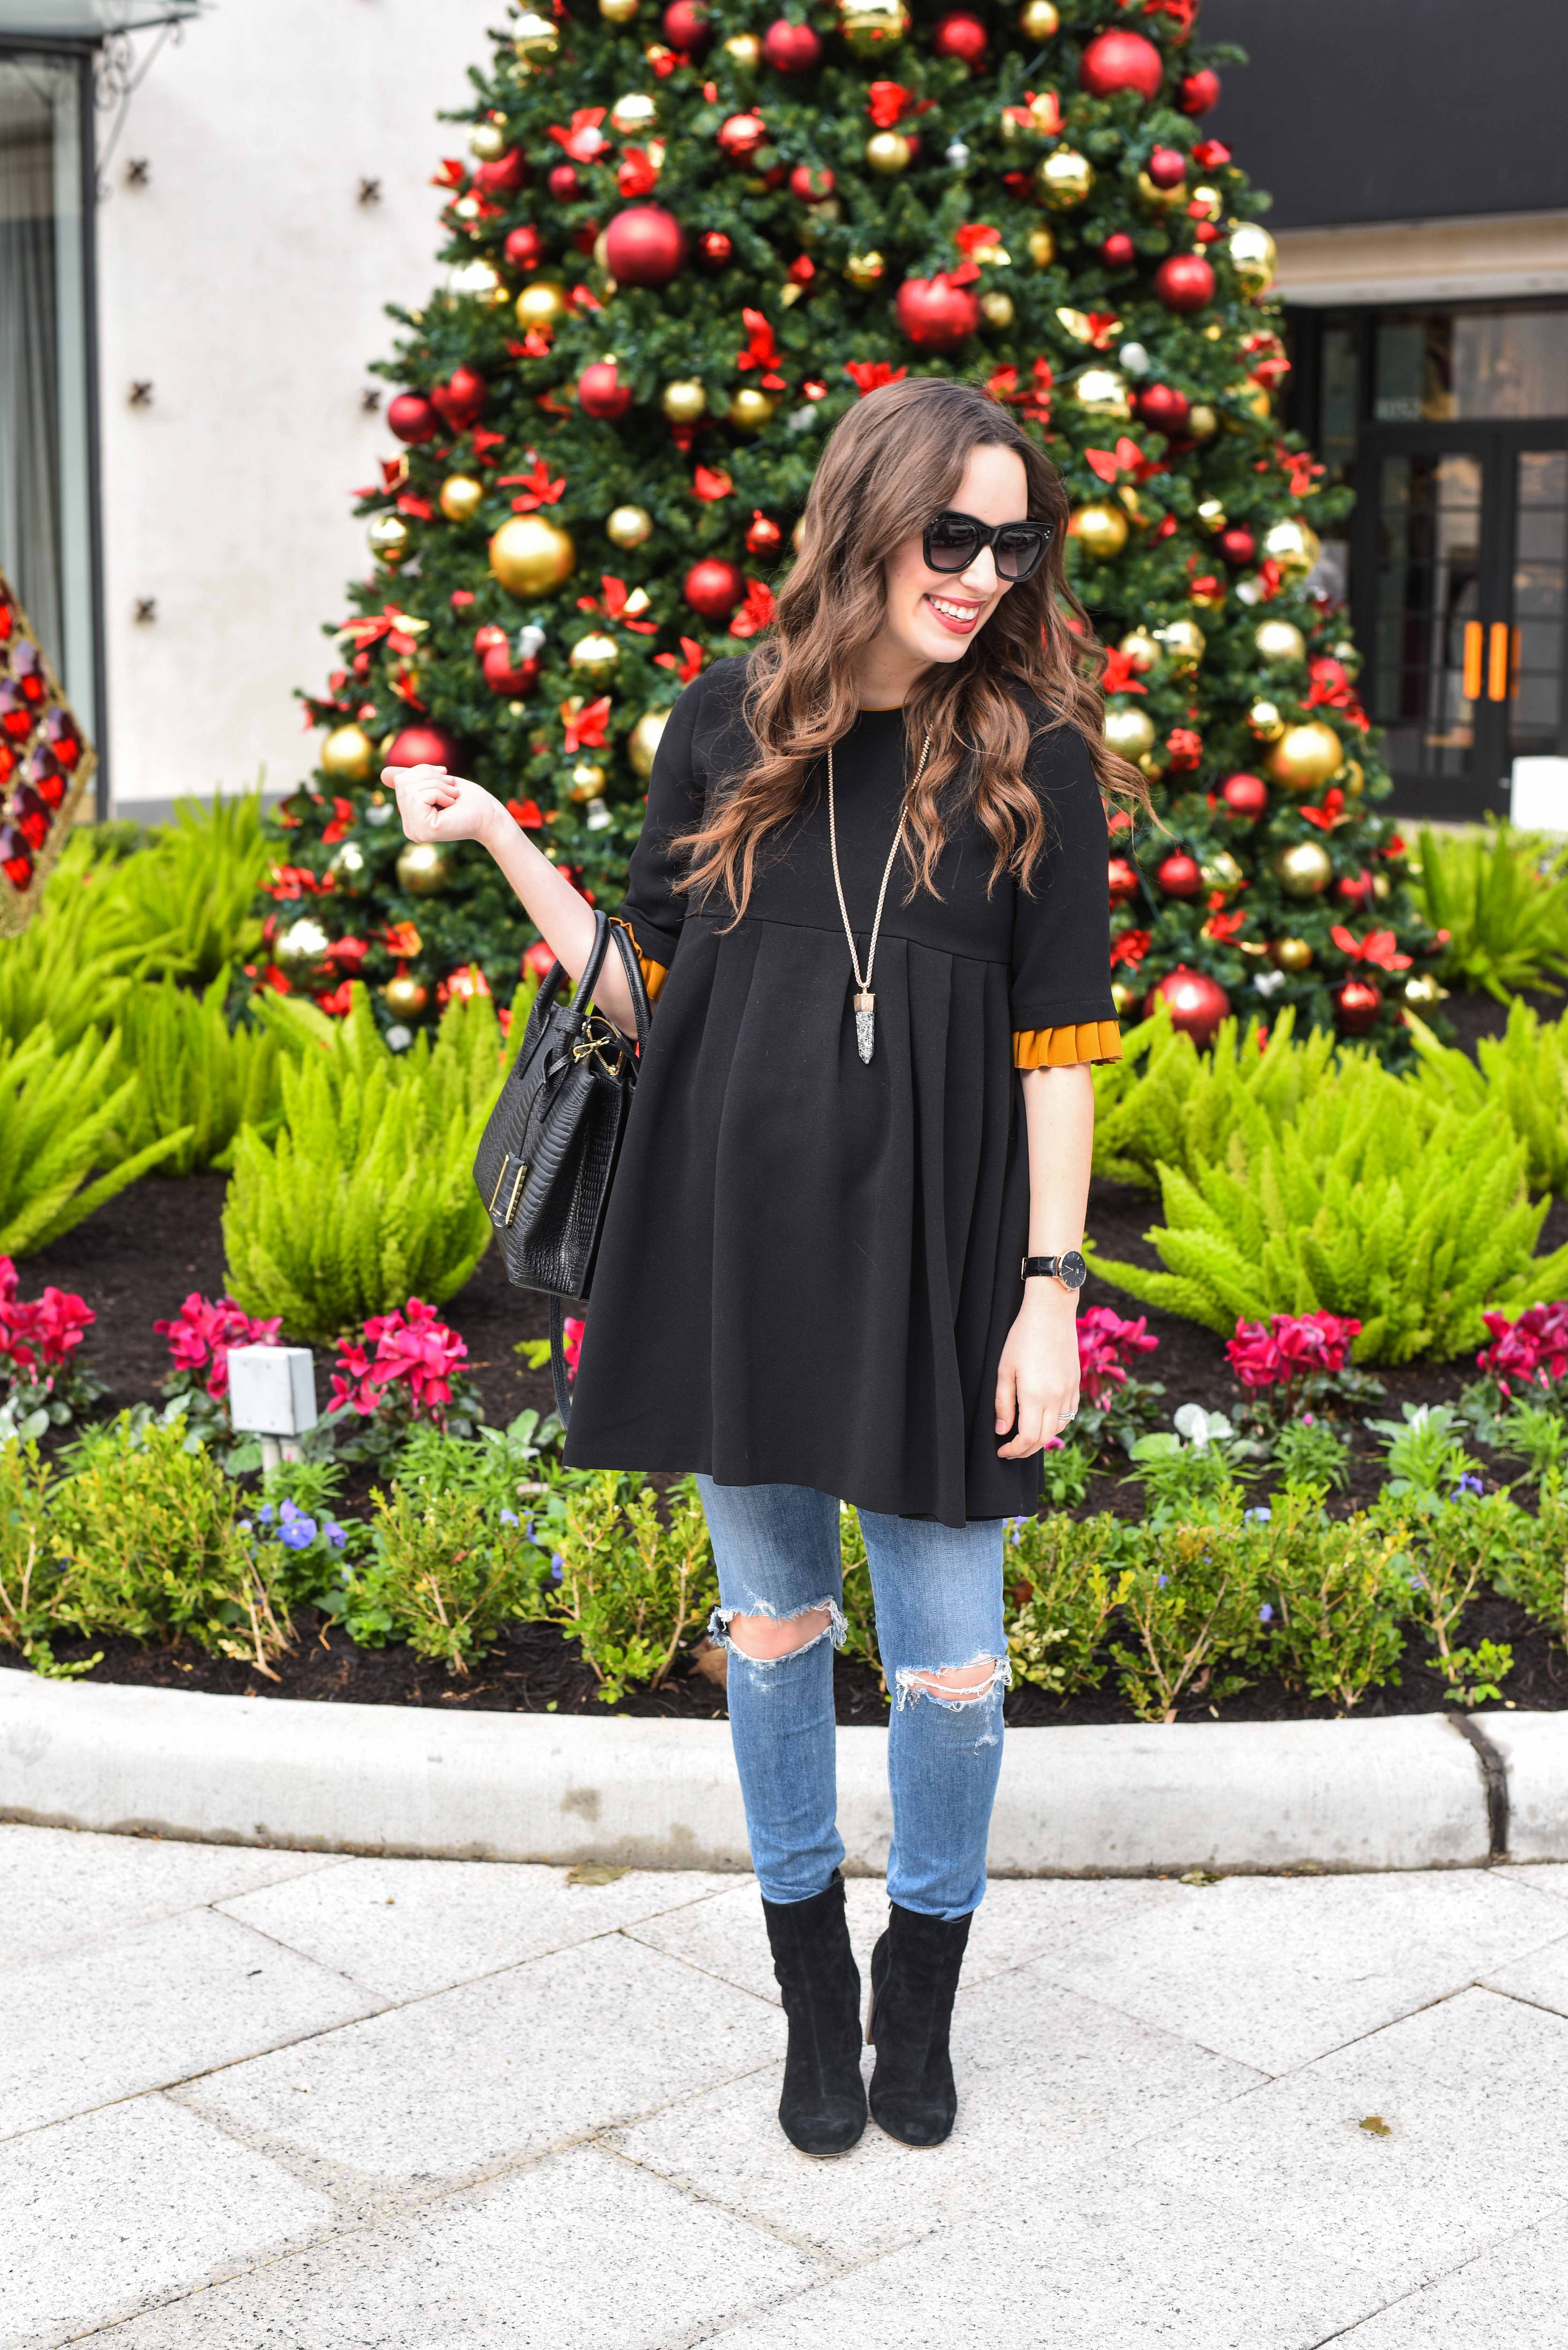 Houston fashion blogger styles a black zara peplum top with citizen maternity skinny jeans and sole society ankle boots for the holidays.